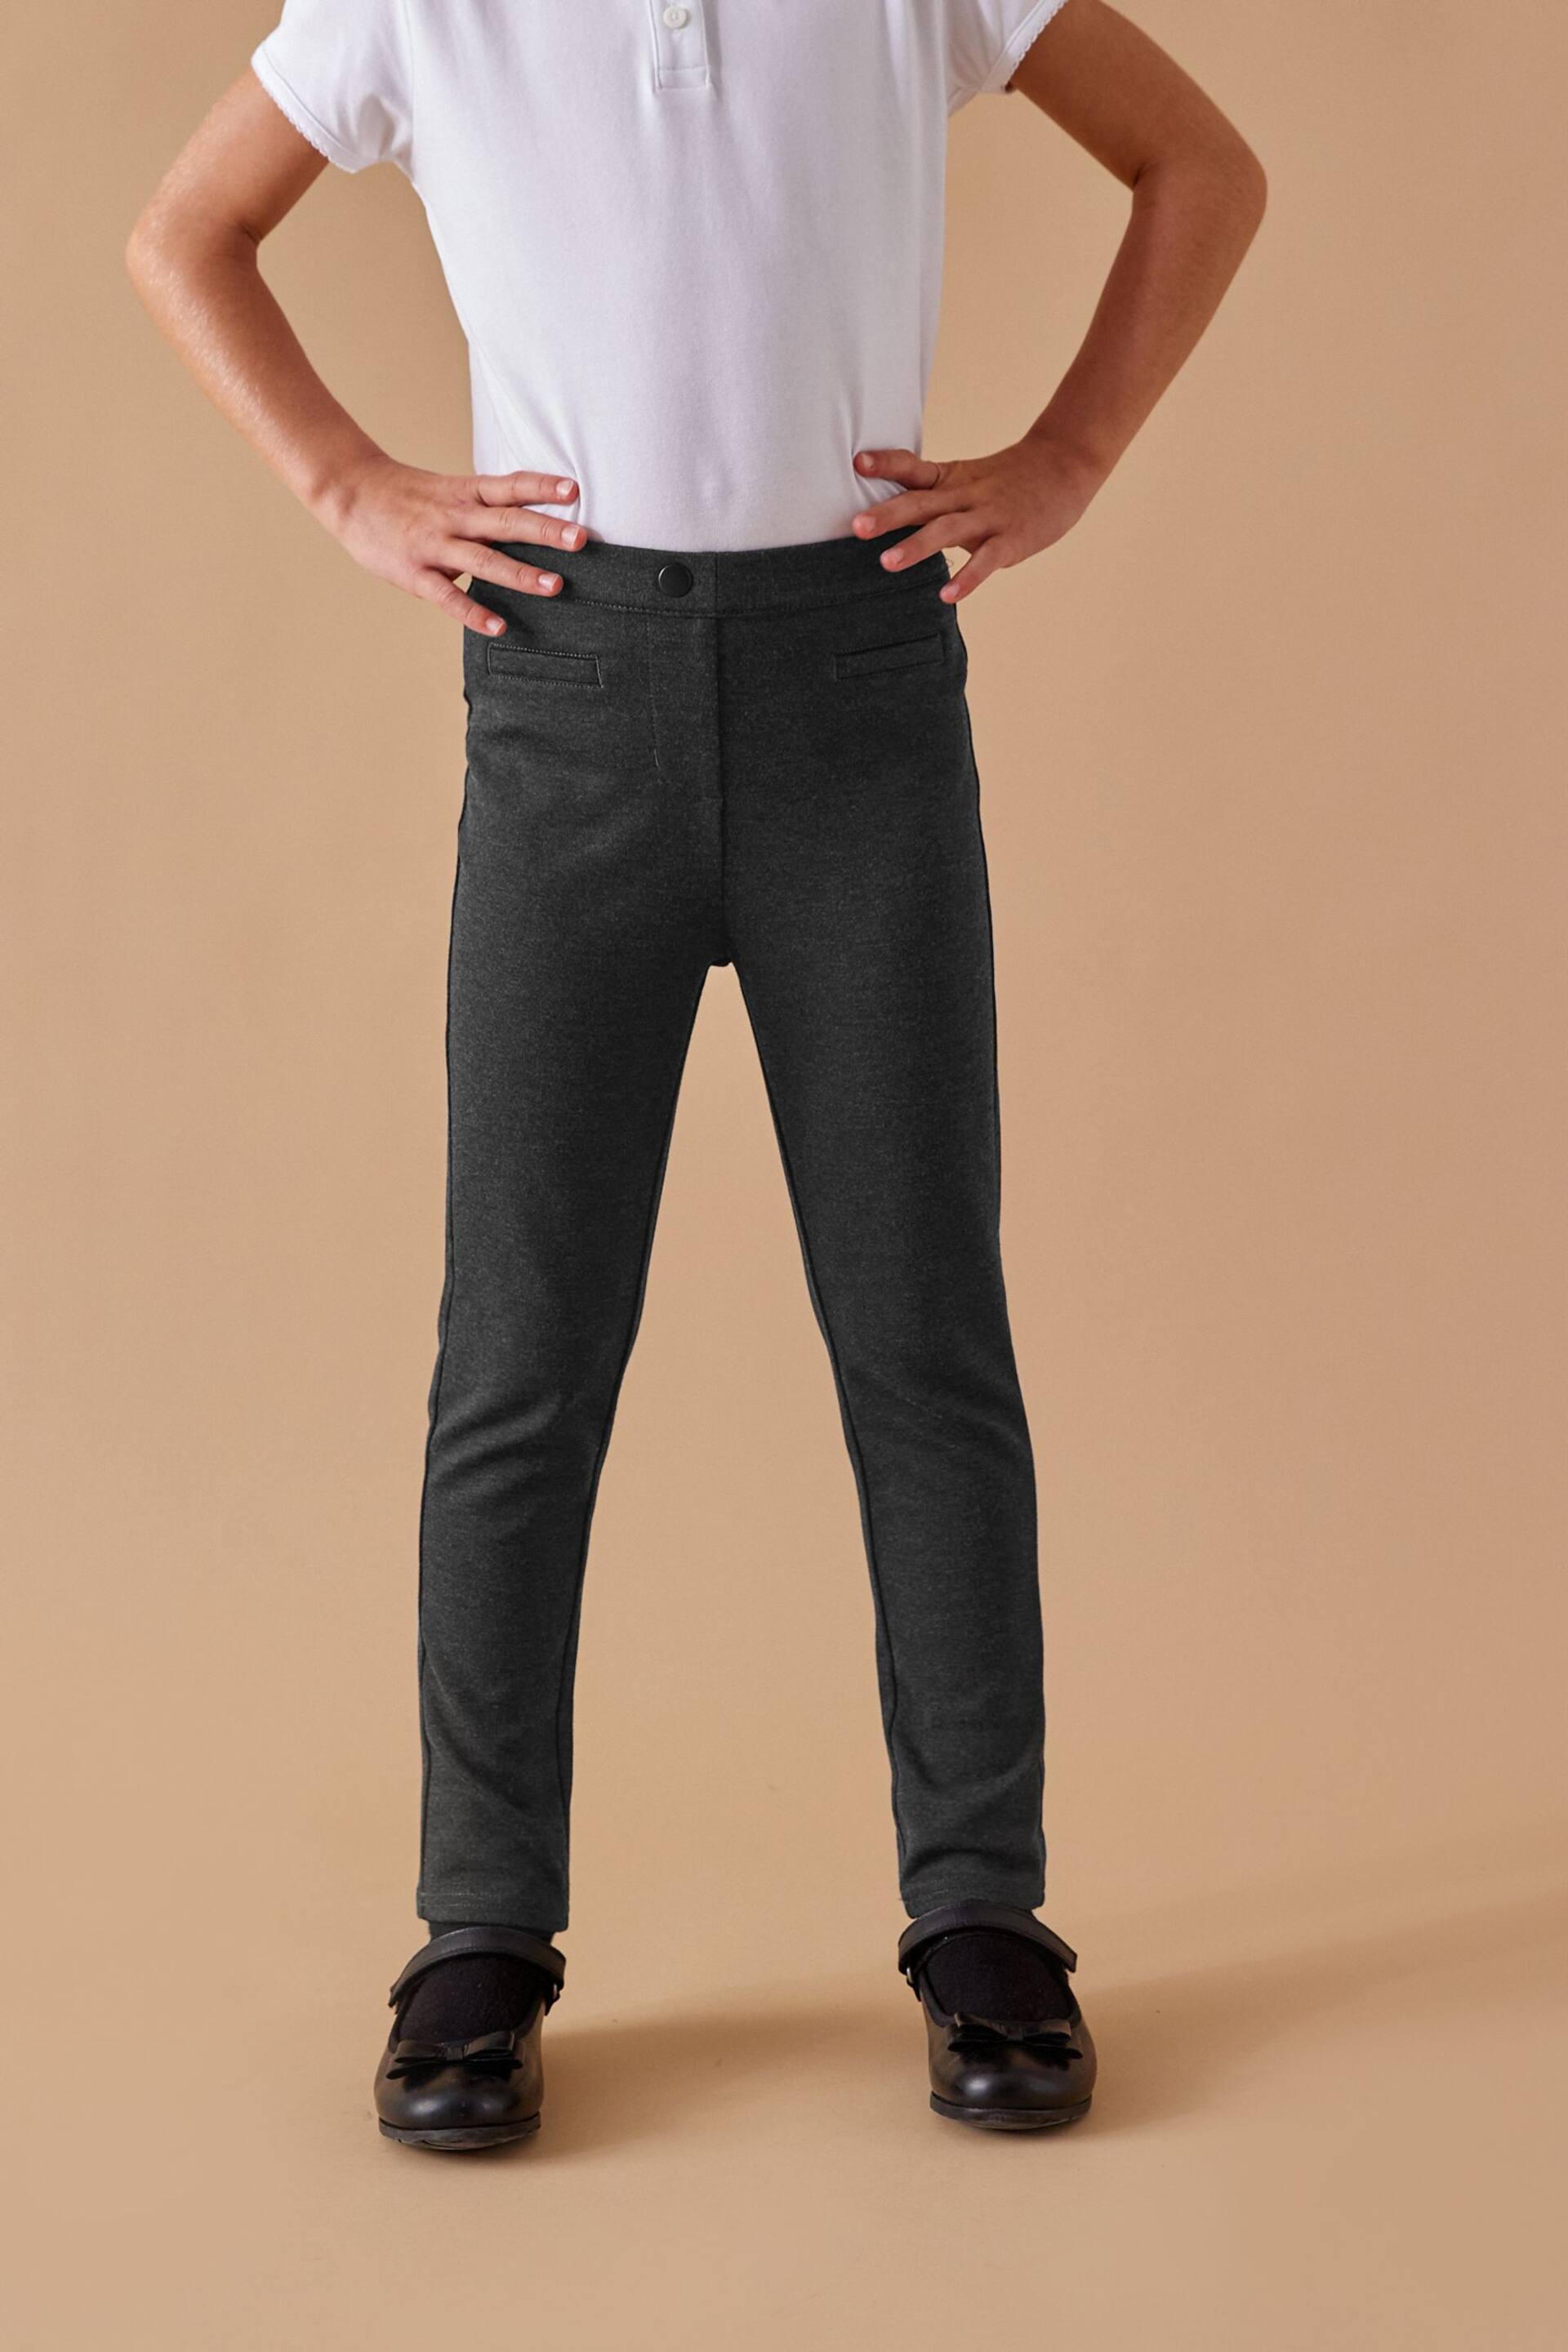 Grey Jersey Stretch Pull-On Skinny School Trousers (3-16yrs) - Image 3 of 6